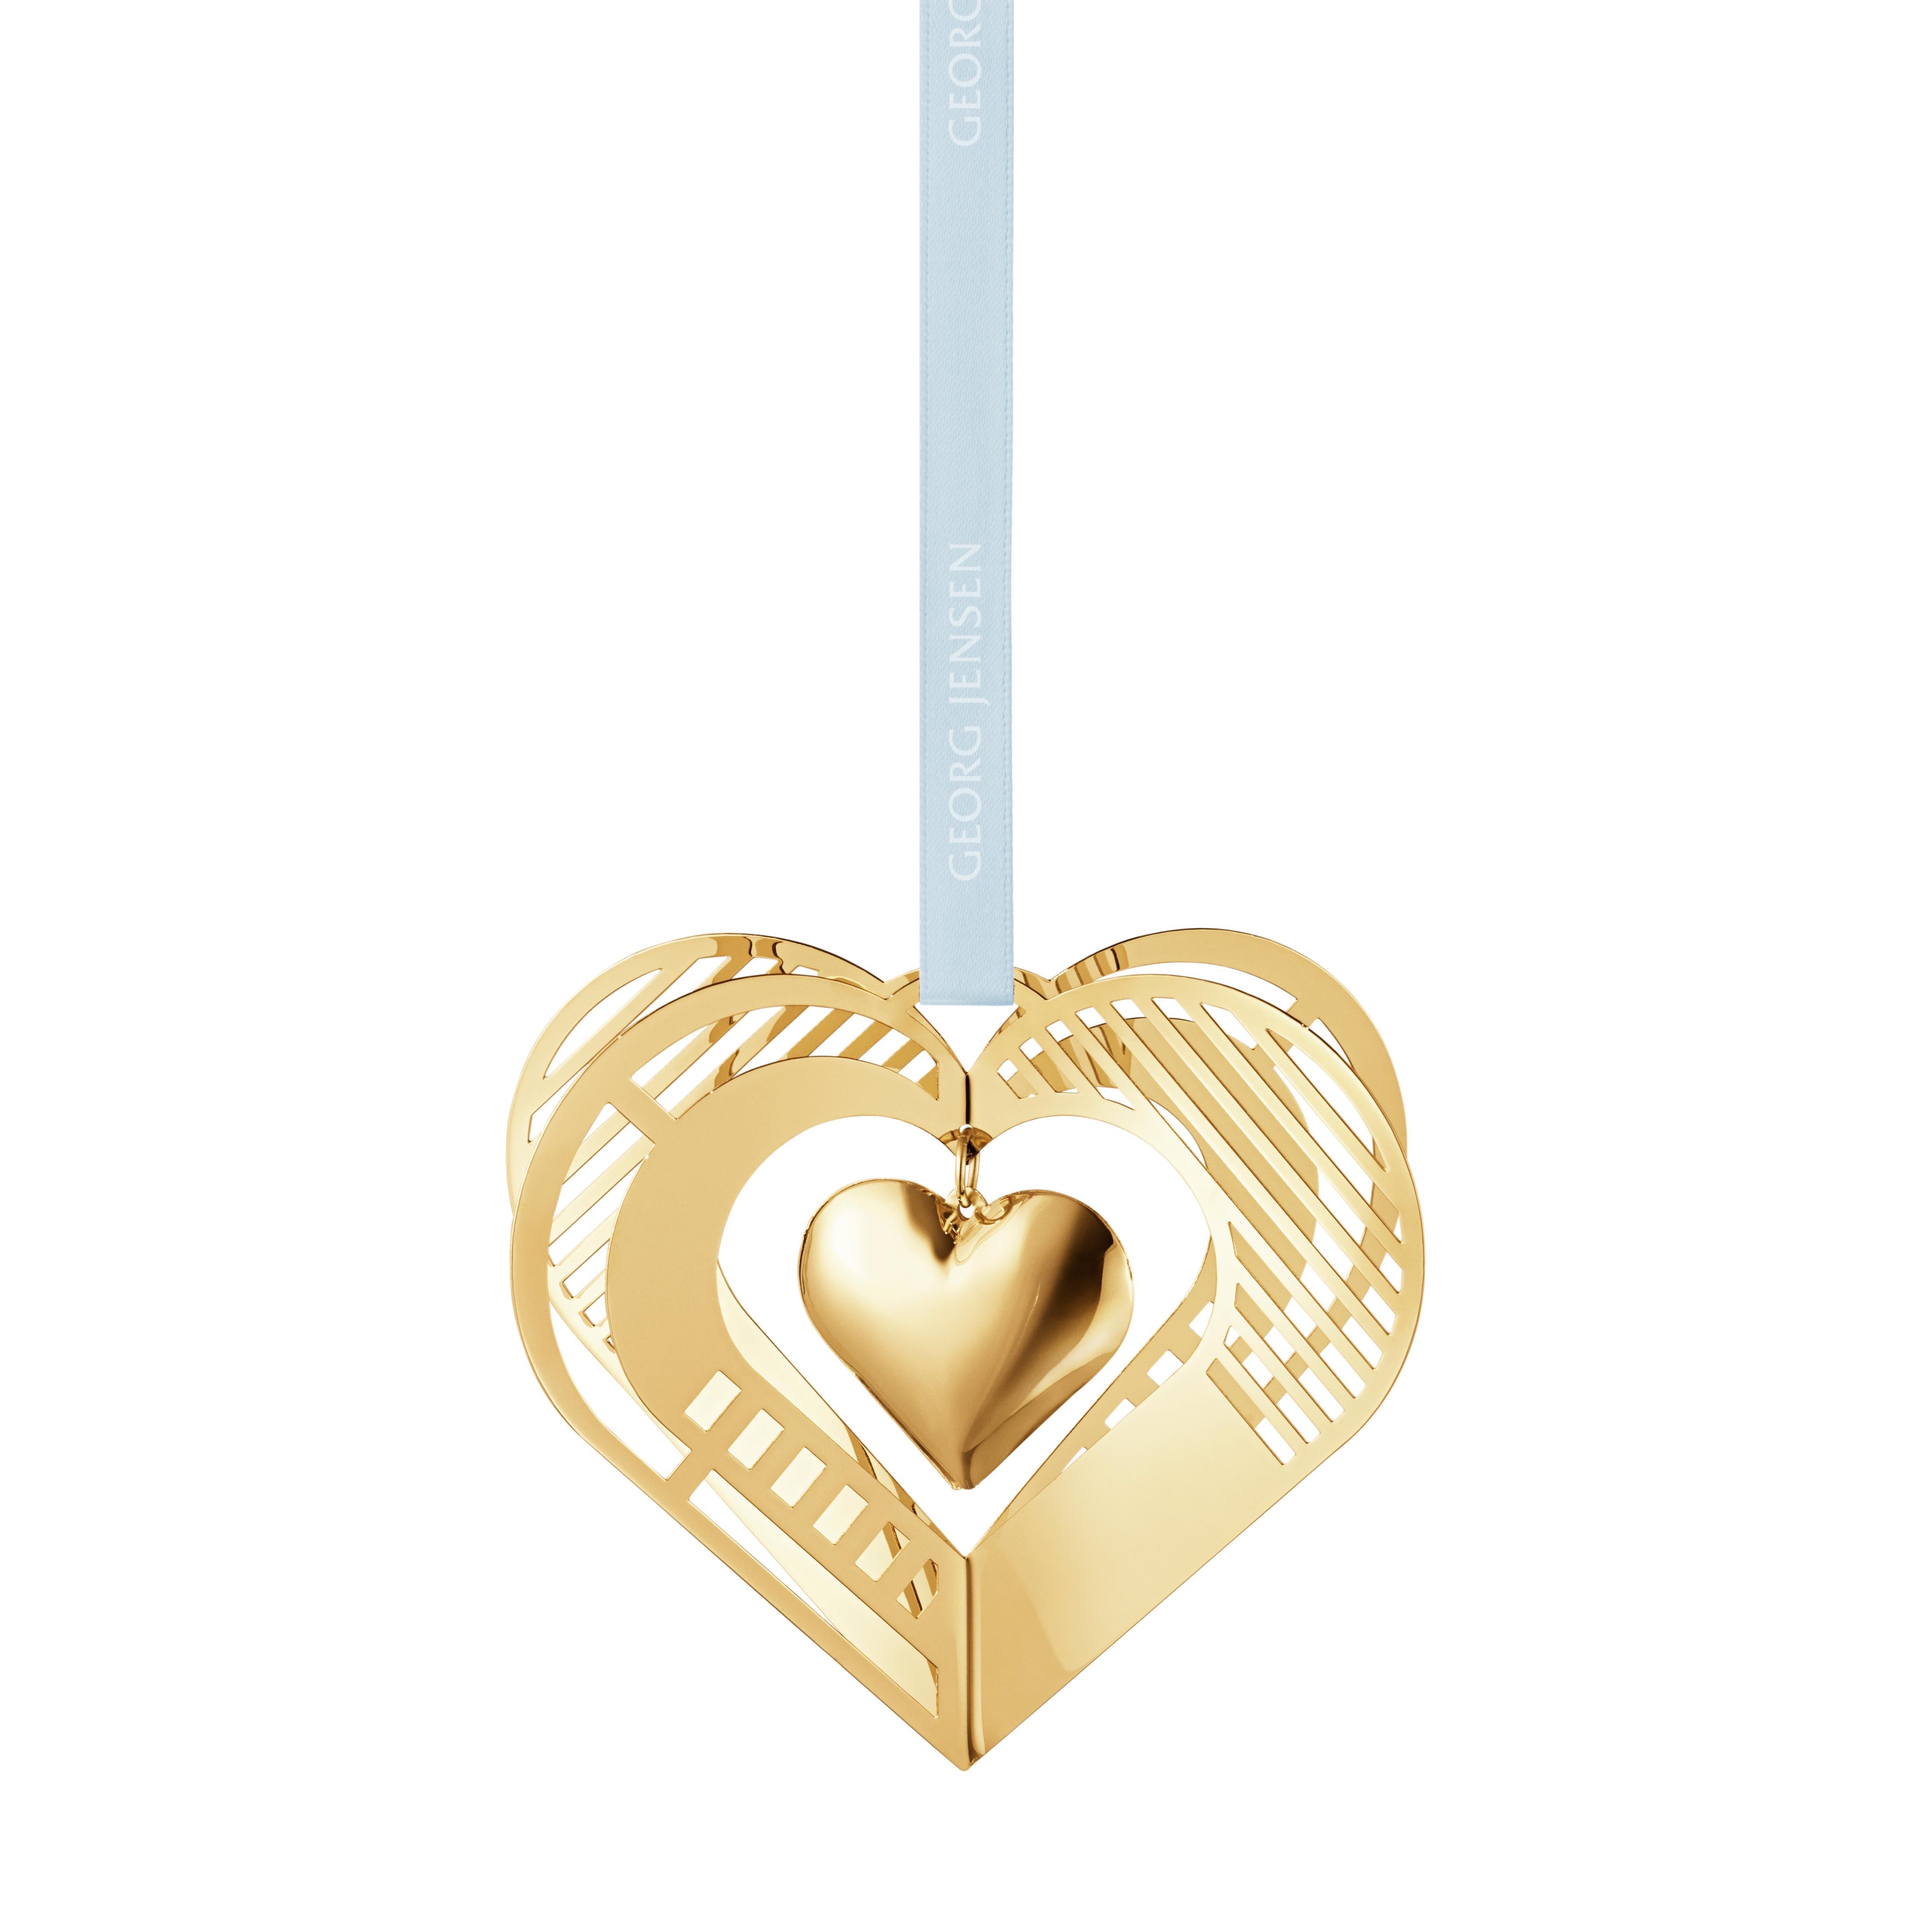 Christmas is a time for showing love to your family and friends so what better symbol to use on a tree decoration than a heart? This gold-plated Christmas ornament features a beautifully crafted heart suspended inside a delicate frame which features